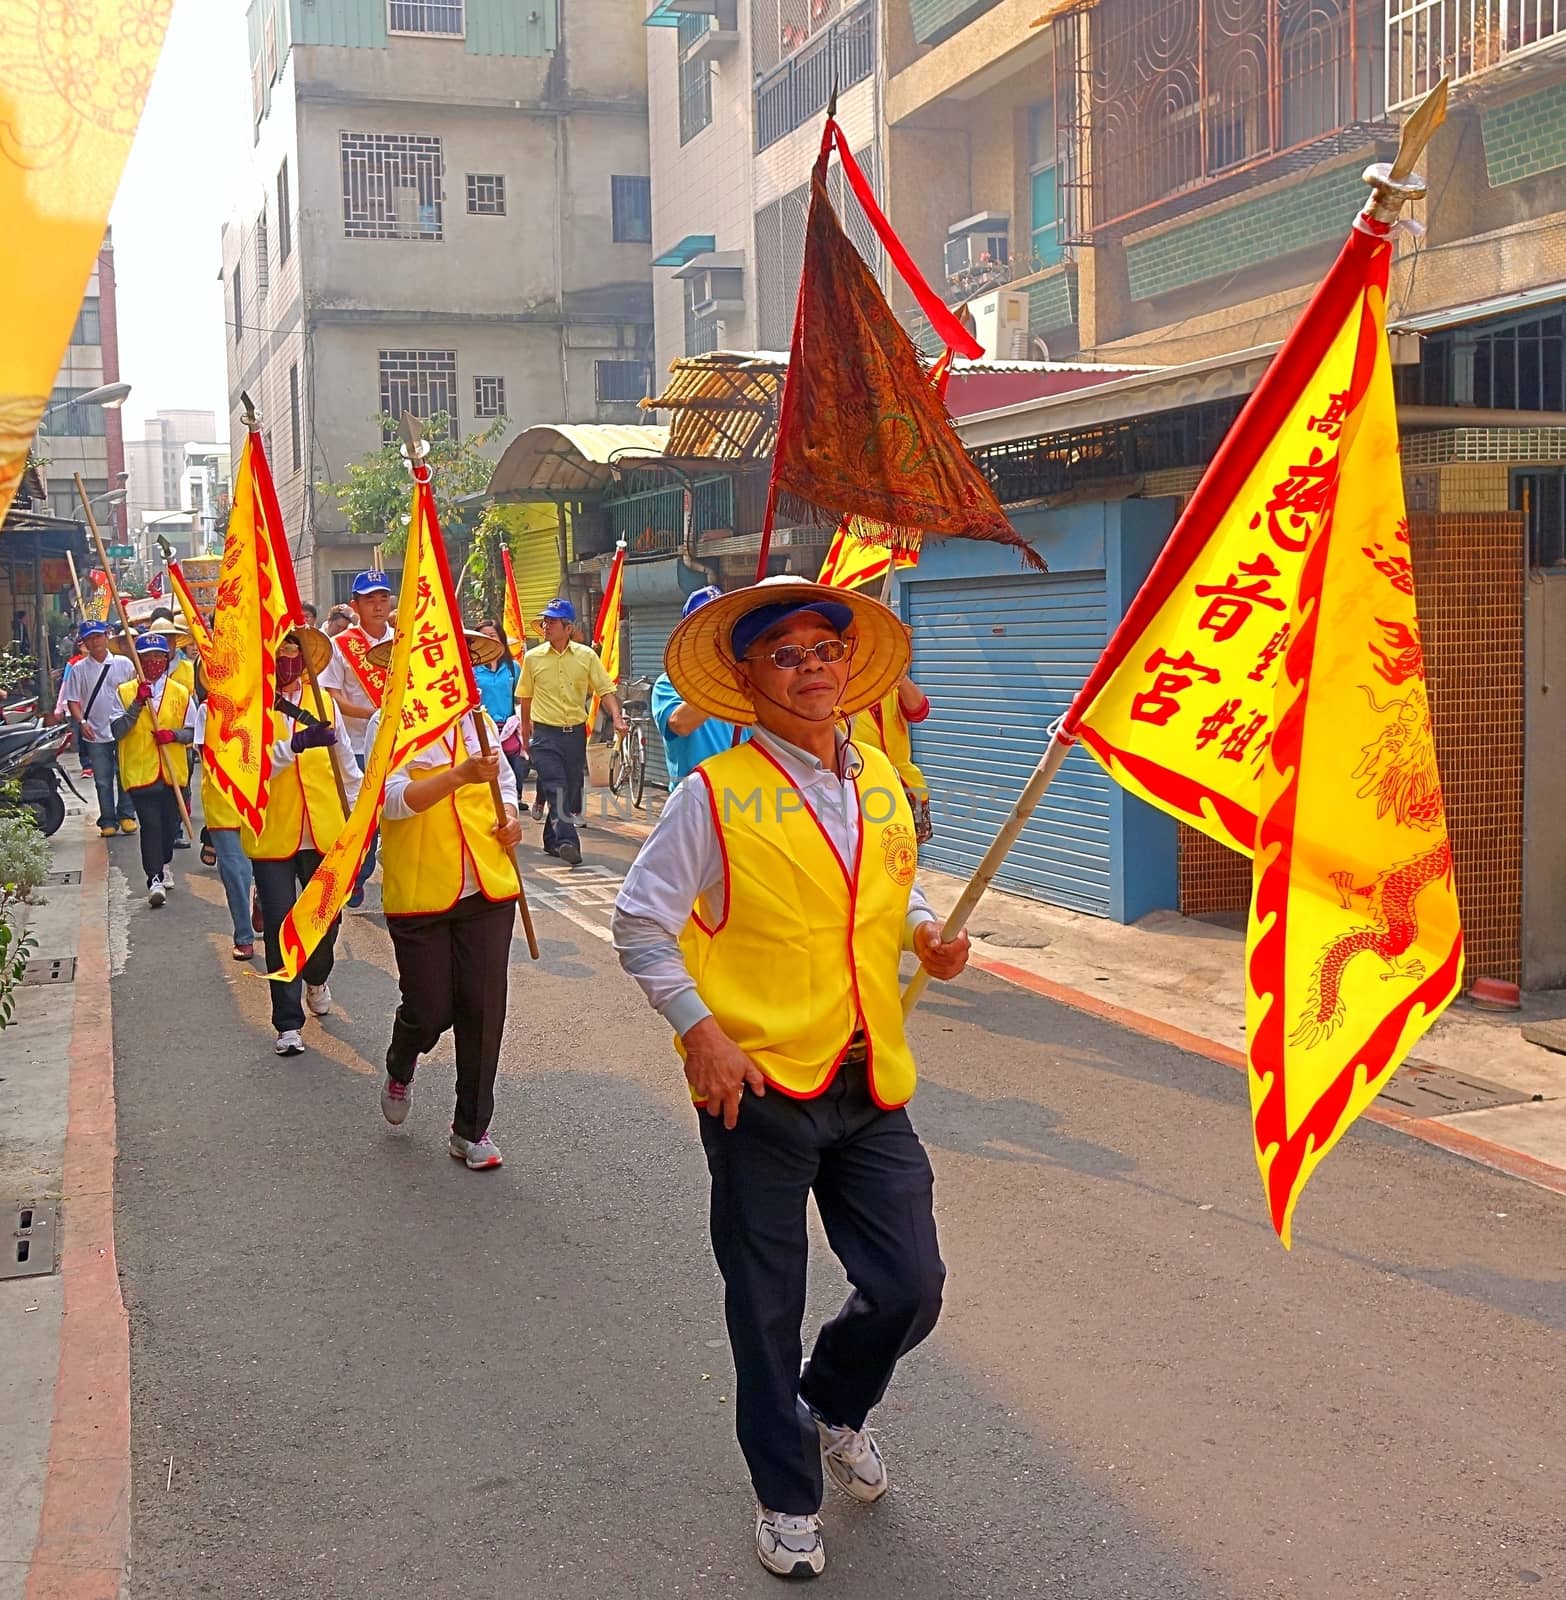 Carrying Yellow Religious Flags by shiyali